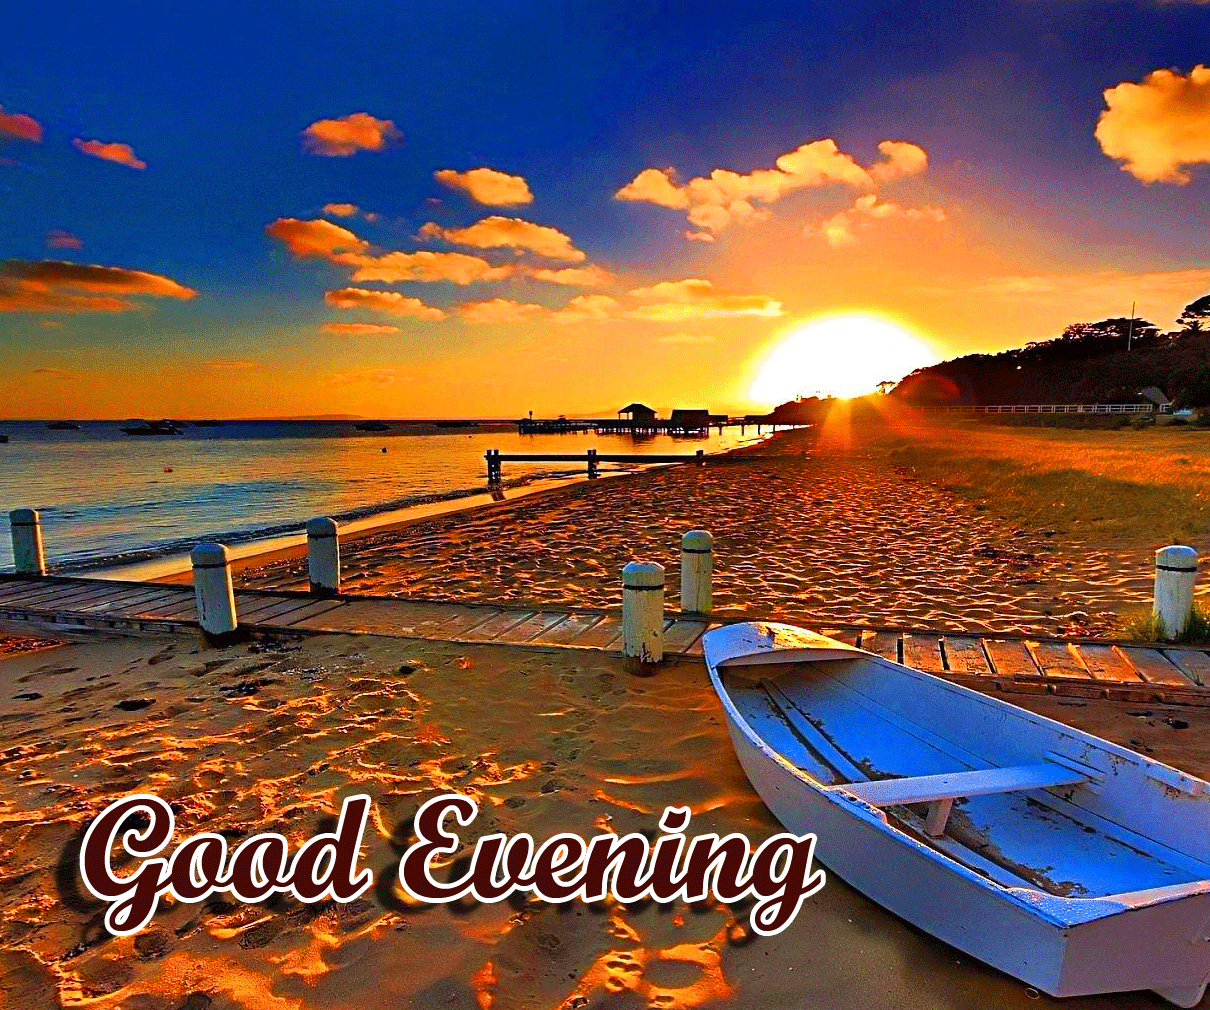 Good Evening Wishes Images Download 6